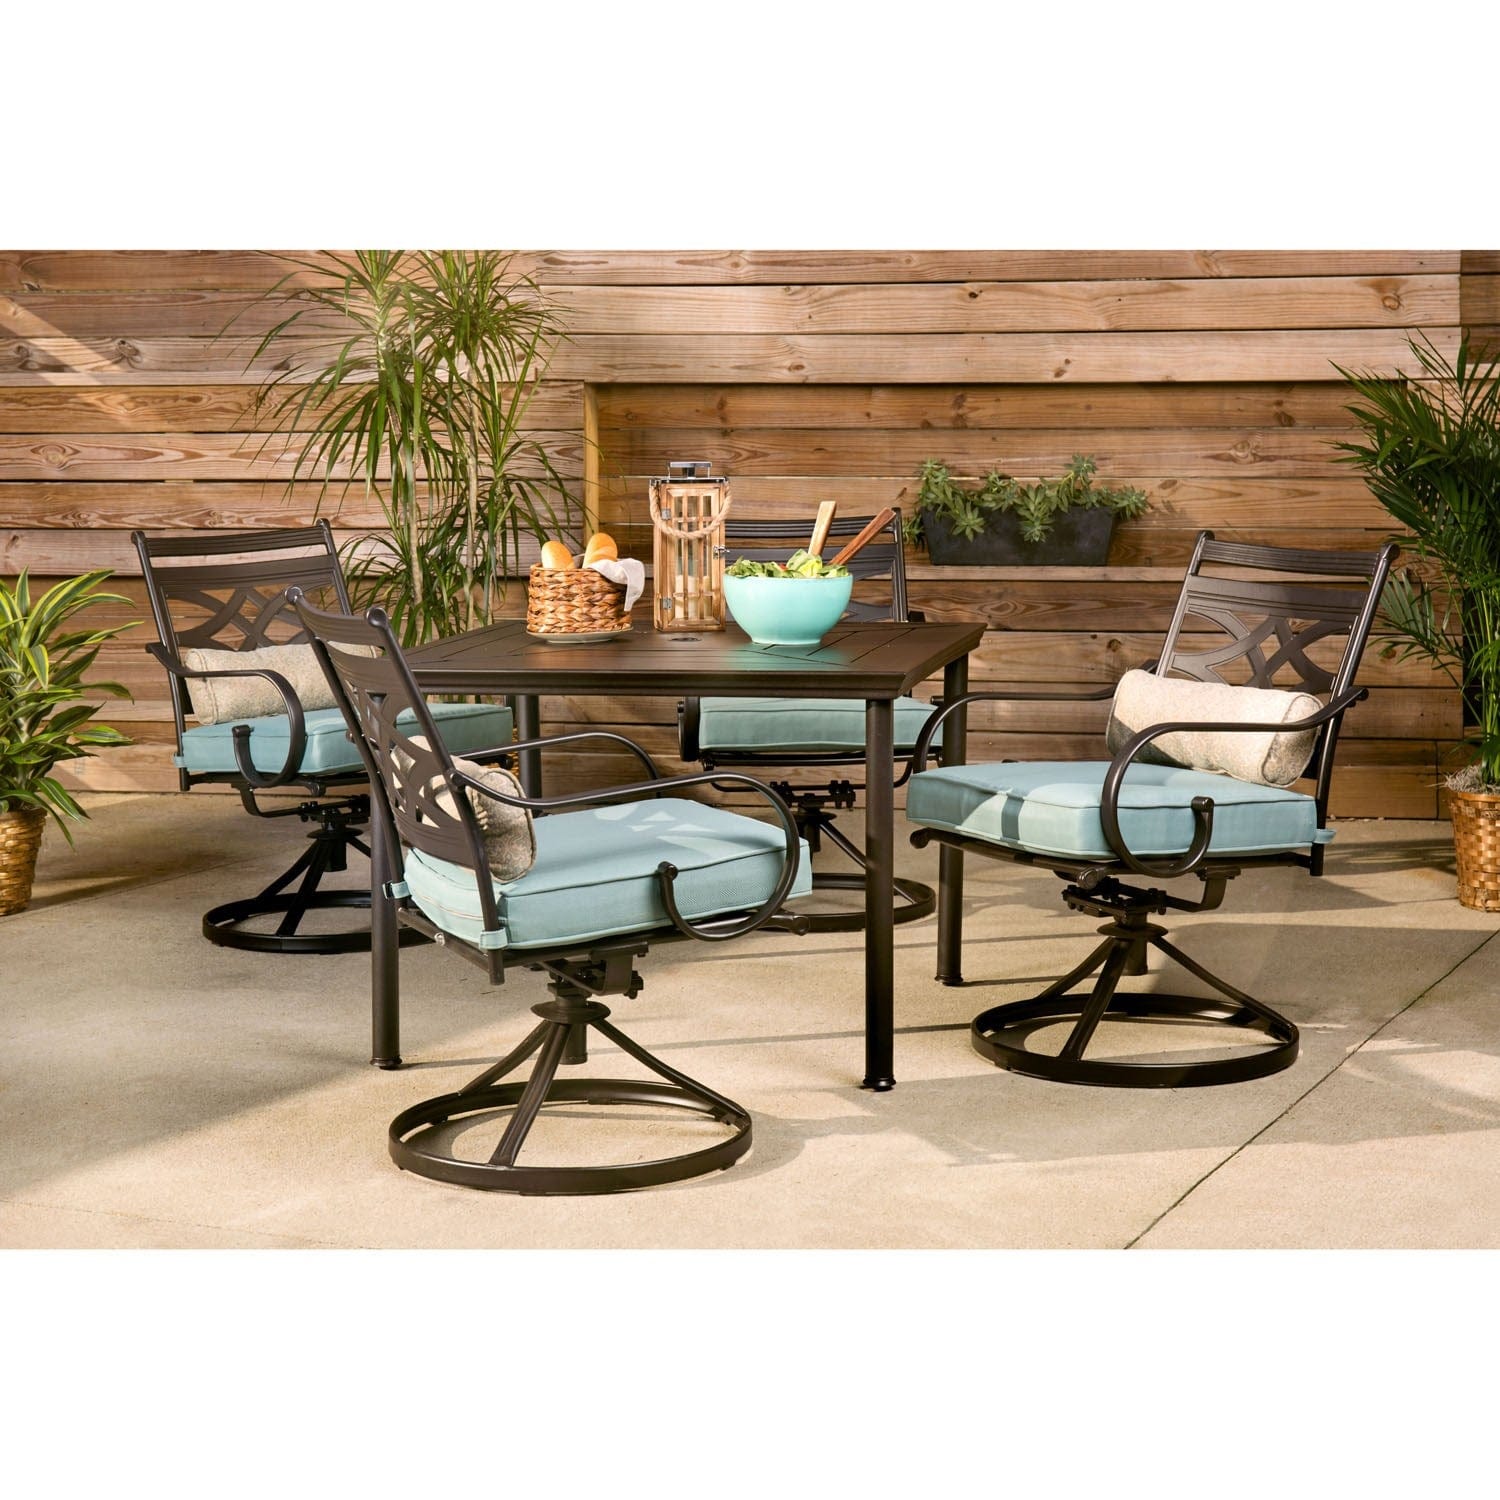 Hanover Outdoor Dining Set Hanover - Montclair 5pc: 4 Swivel Rockers, 40" Square Dining Table | MCLRDN5PCSQSW4-BLU